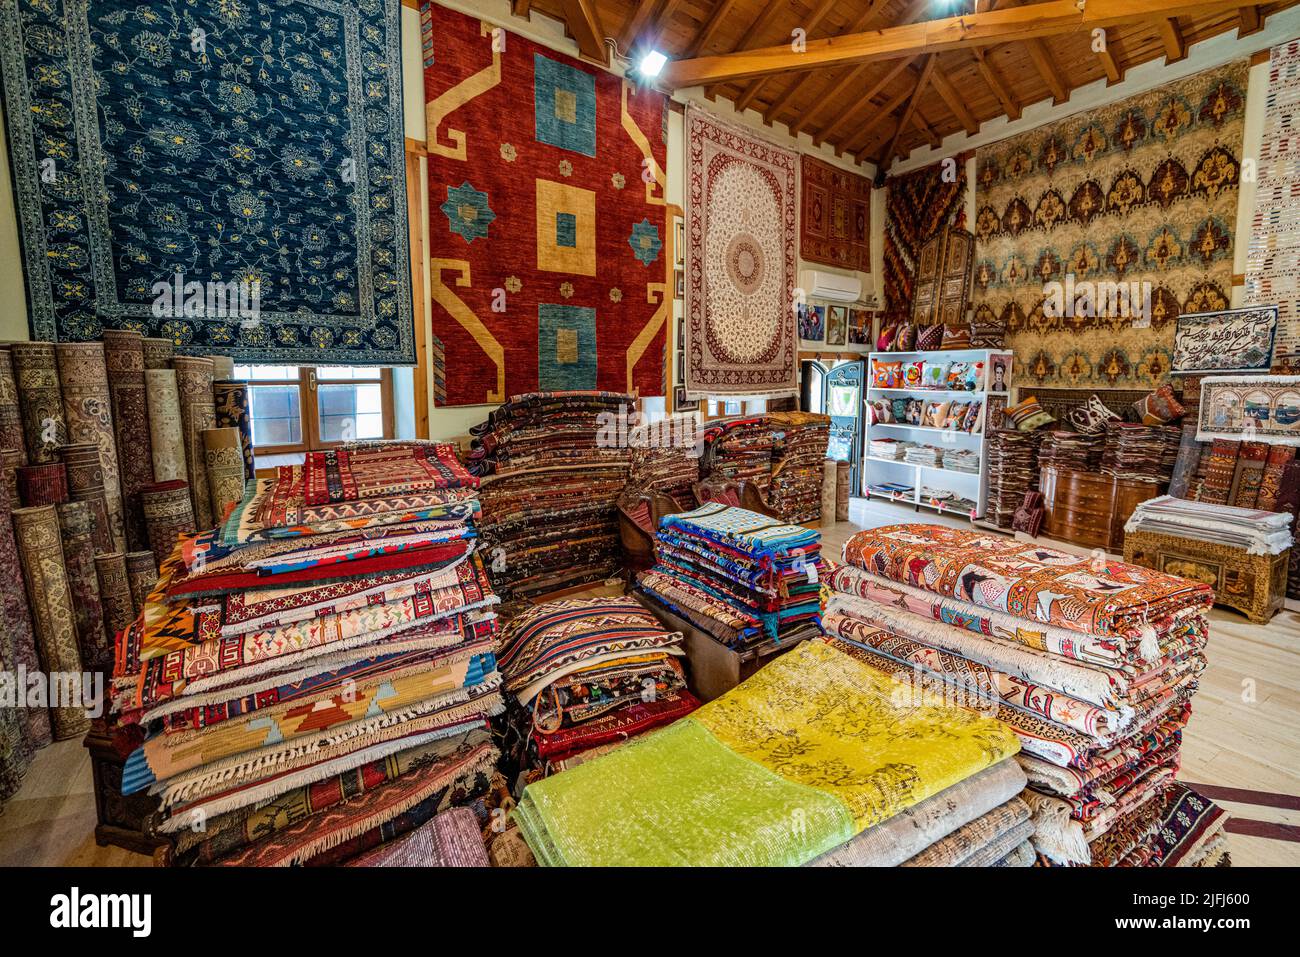 Large stacks of oriental  rugs in a store. Colorful carpet market. Turkey Stock Photo